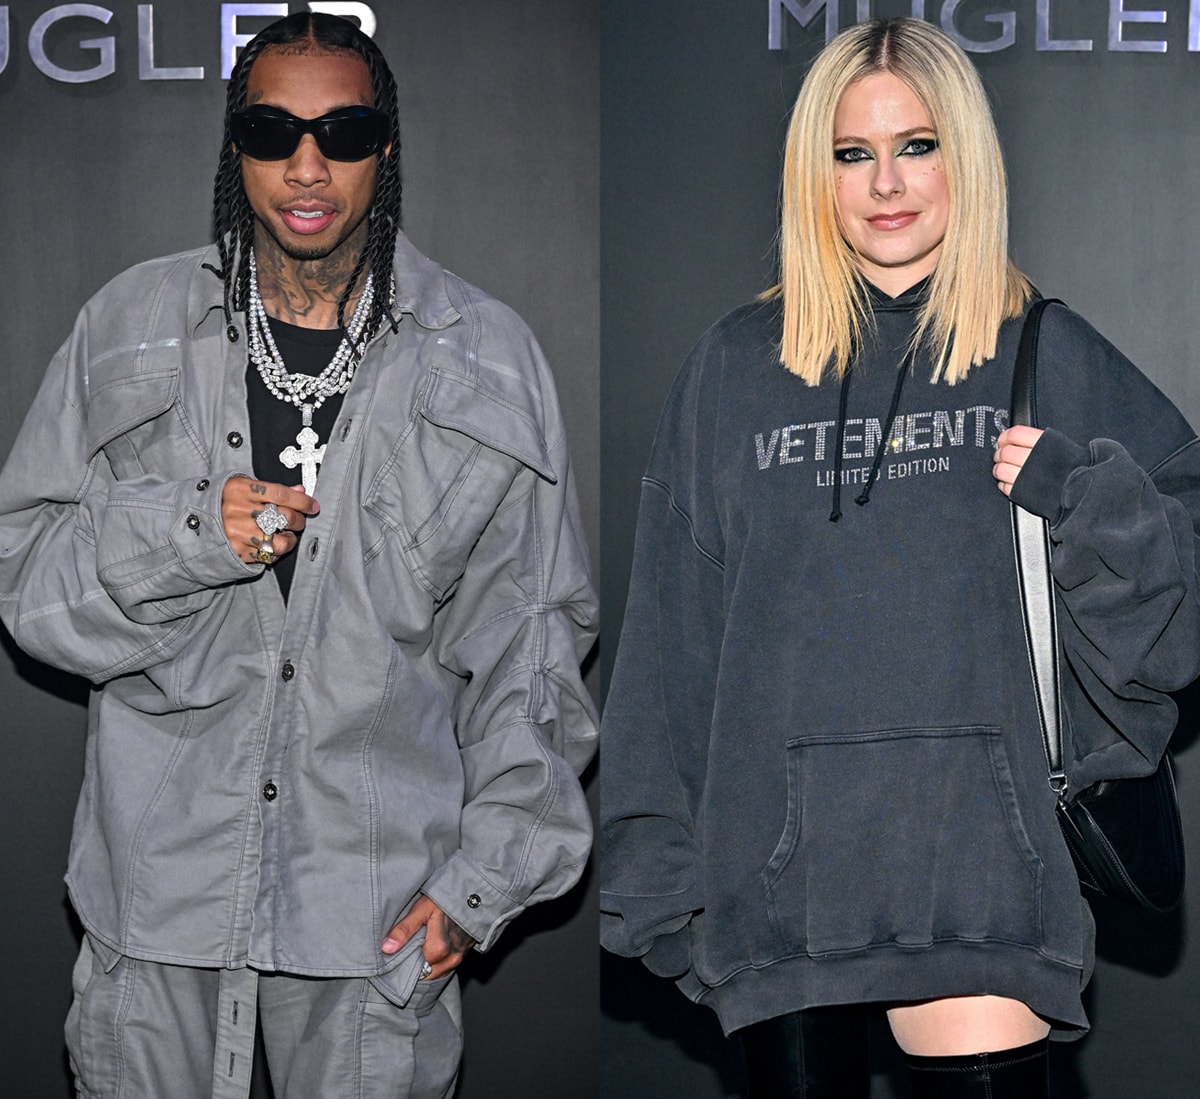 Tyga and Avril Lavigne seemingly confirmed romance rumors after they were pictured kissing at the Mugler x Hunter Schafer party during Paris Fashion Week on March 6, 2023